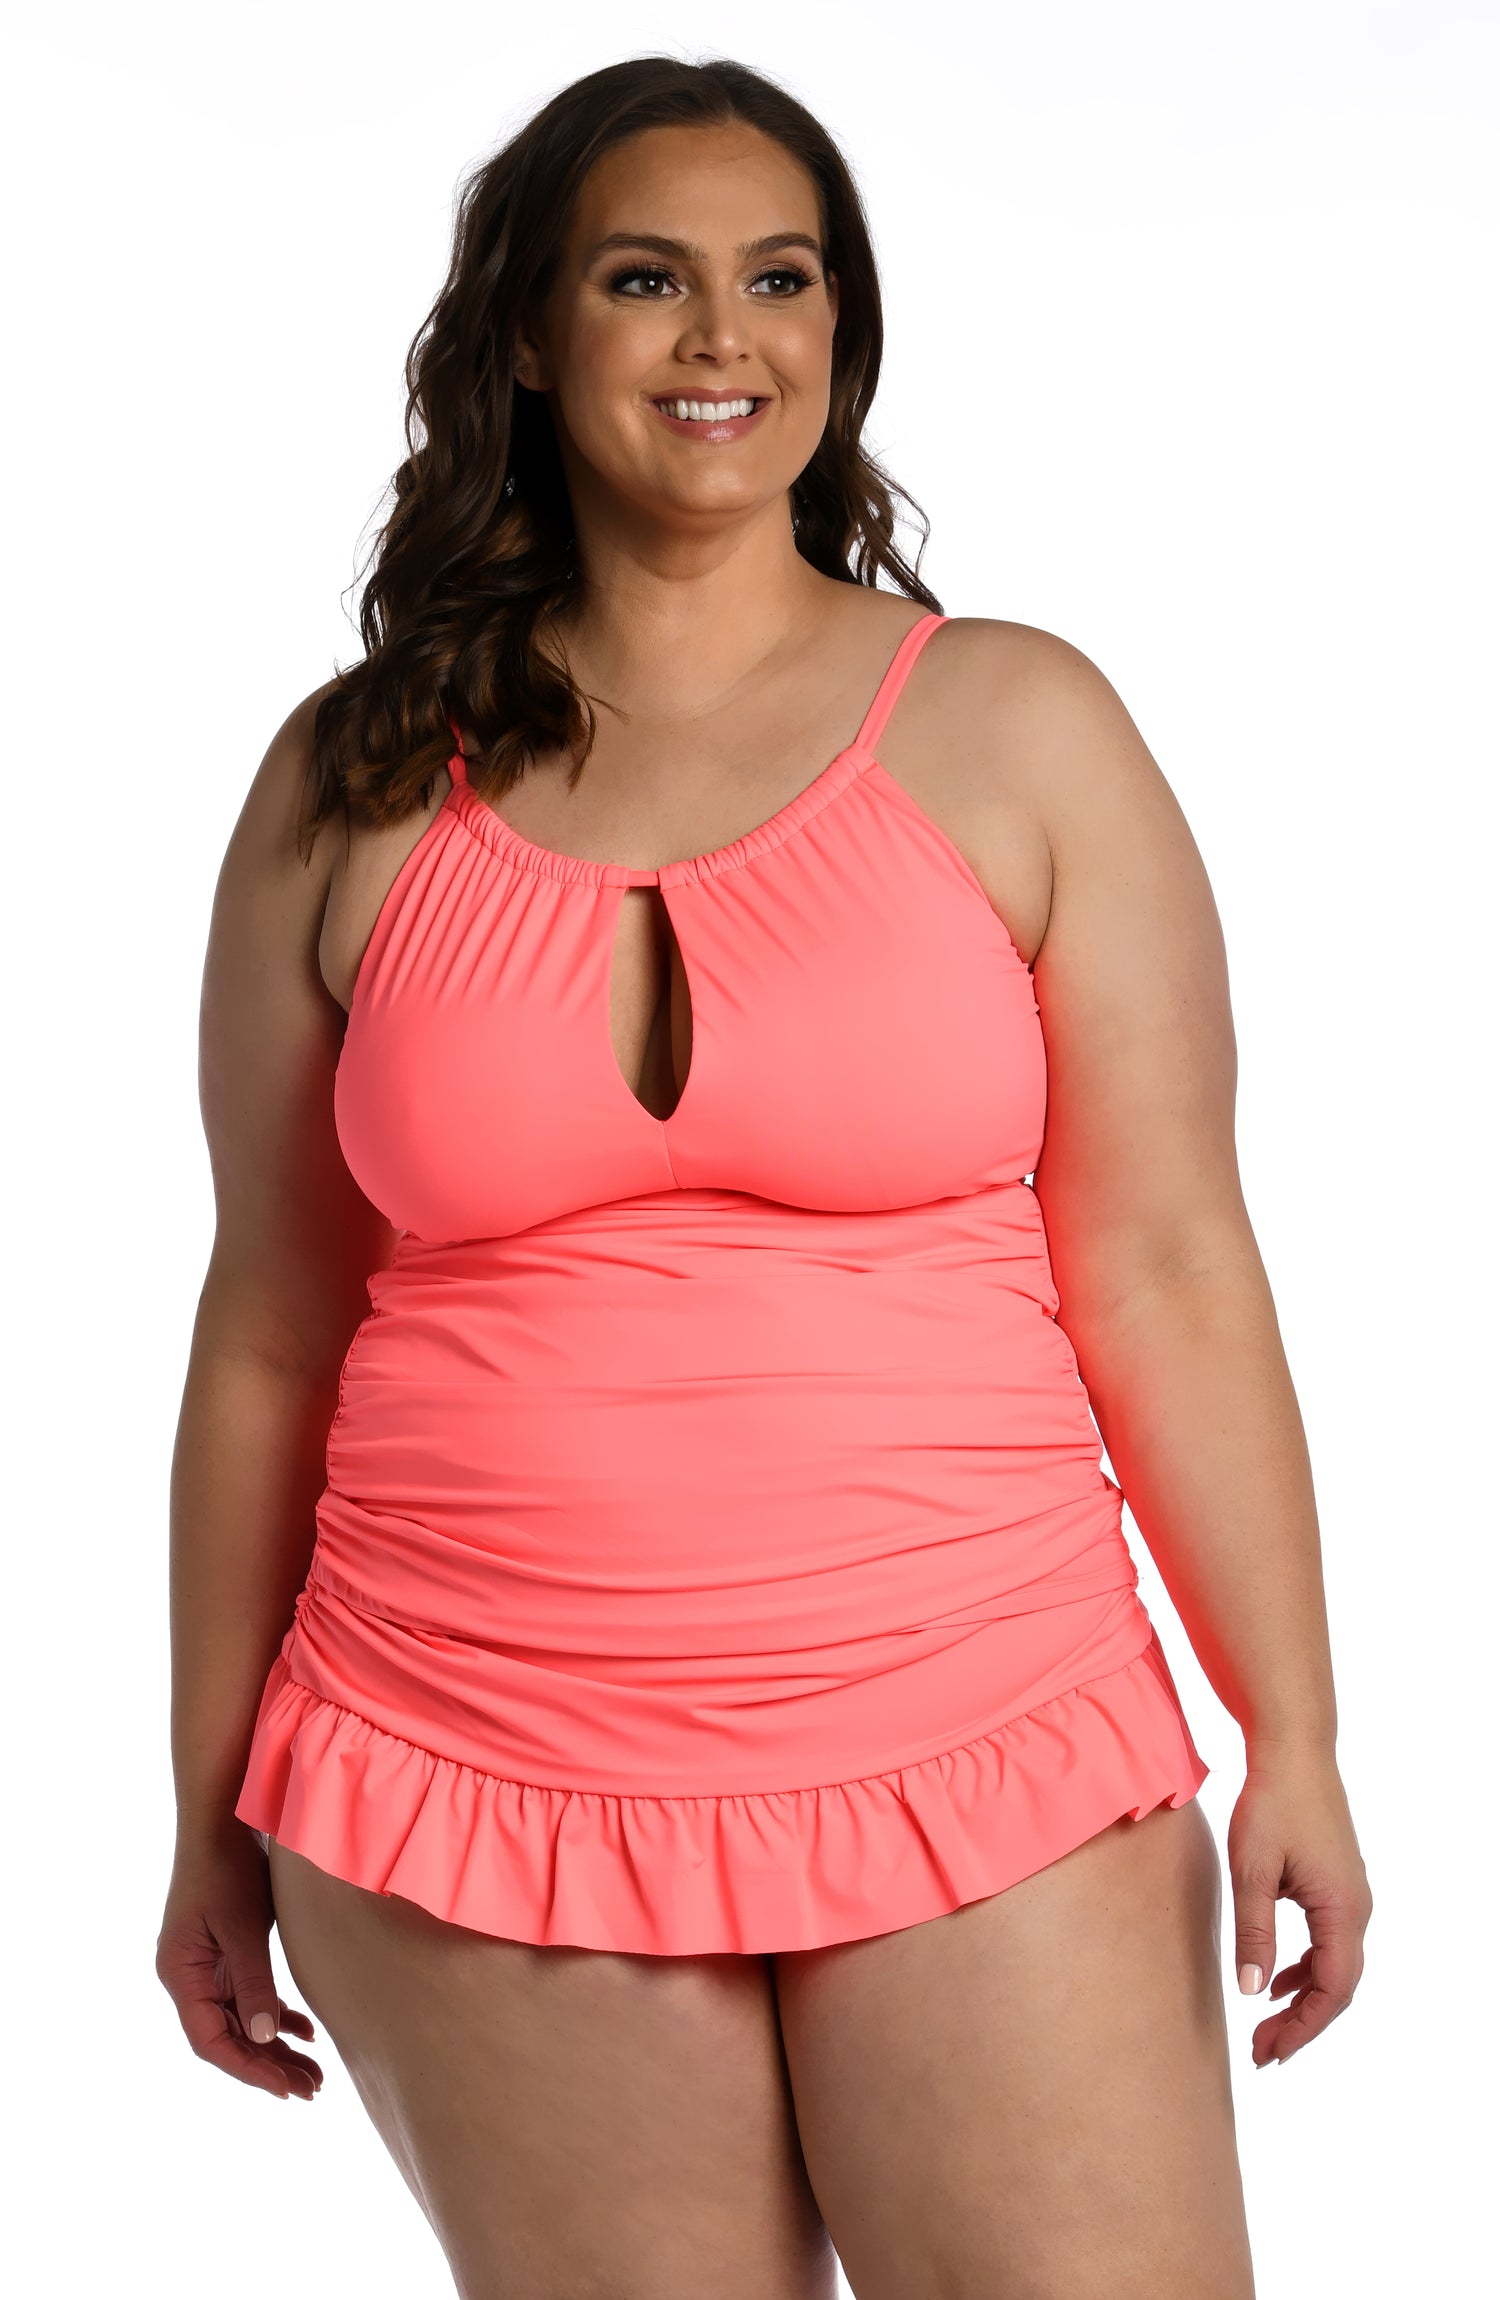 Model is wearing a hot coral colored keyhole tankini swimsuit top from our Best-Selling Island Goddess collection.